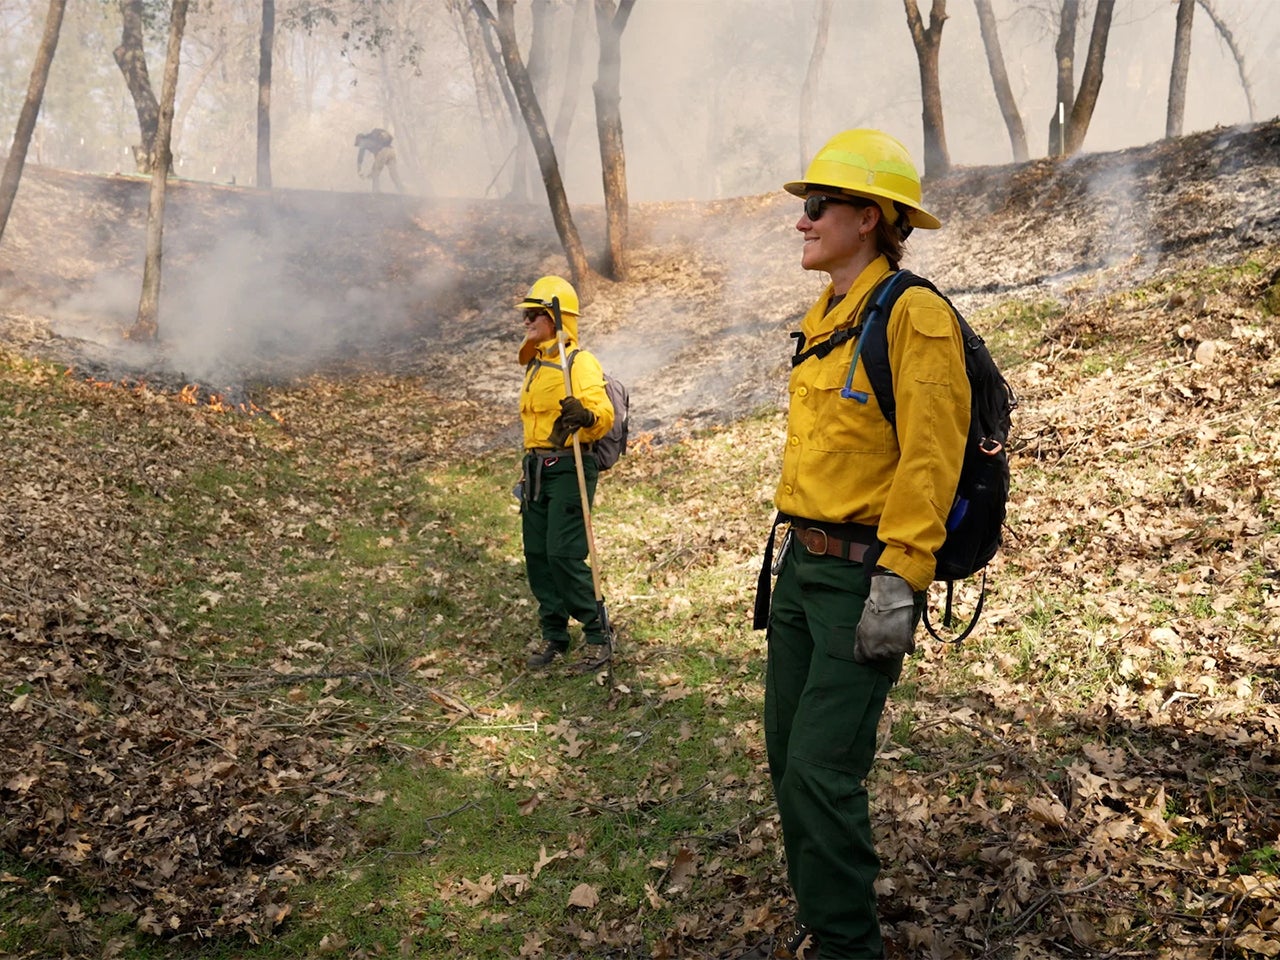 Yoshi Maezumi and Rebecca Wayman, in yellow firefighting jackets and helmets, stand in a meadow with light smoke in the background from a prescribed burn